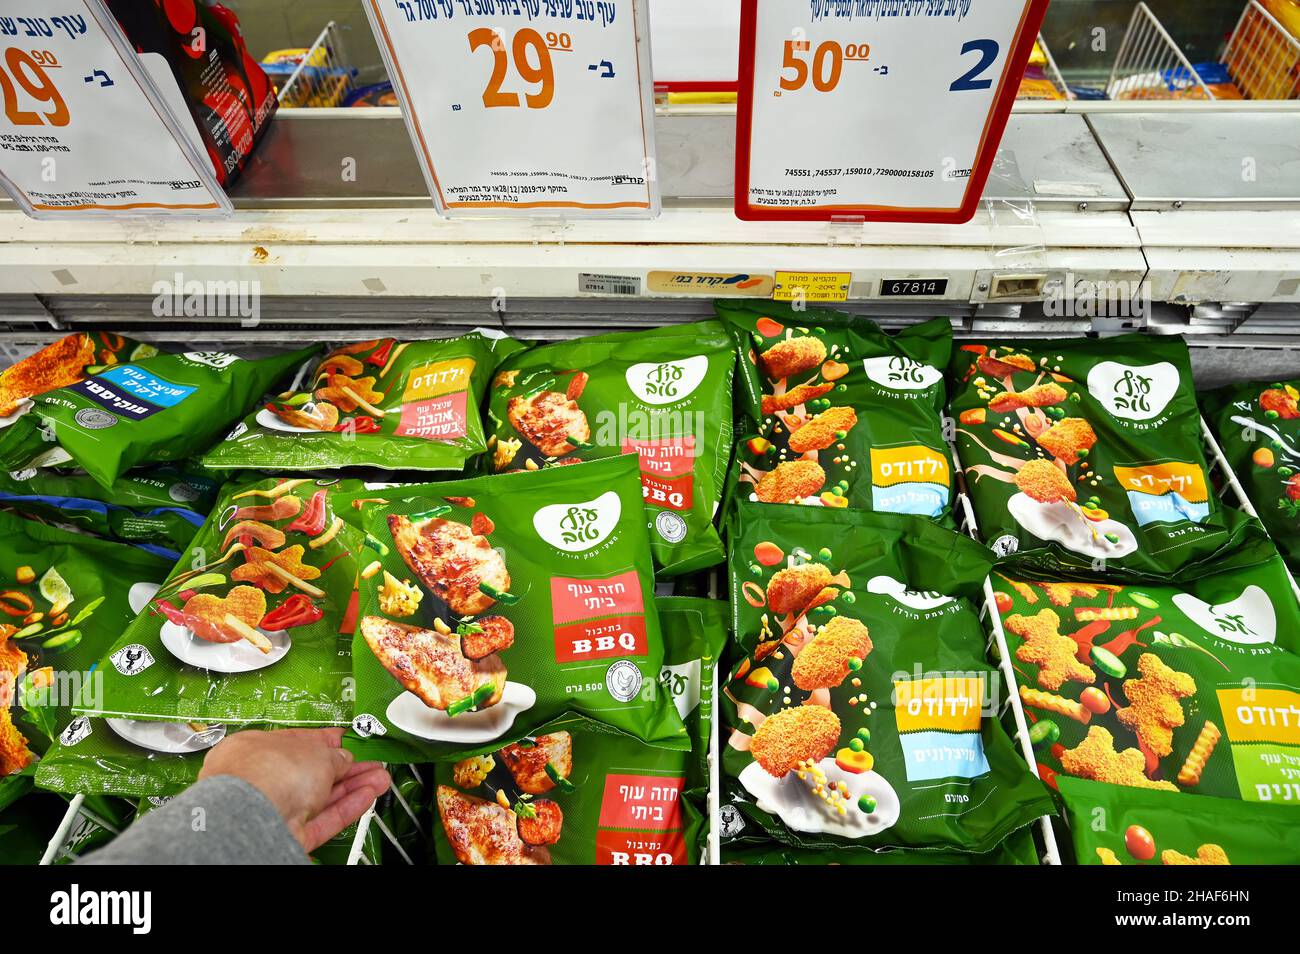 Frozen food packages in a supermarket. Stock Photo